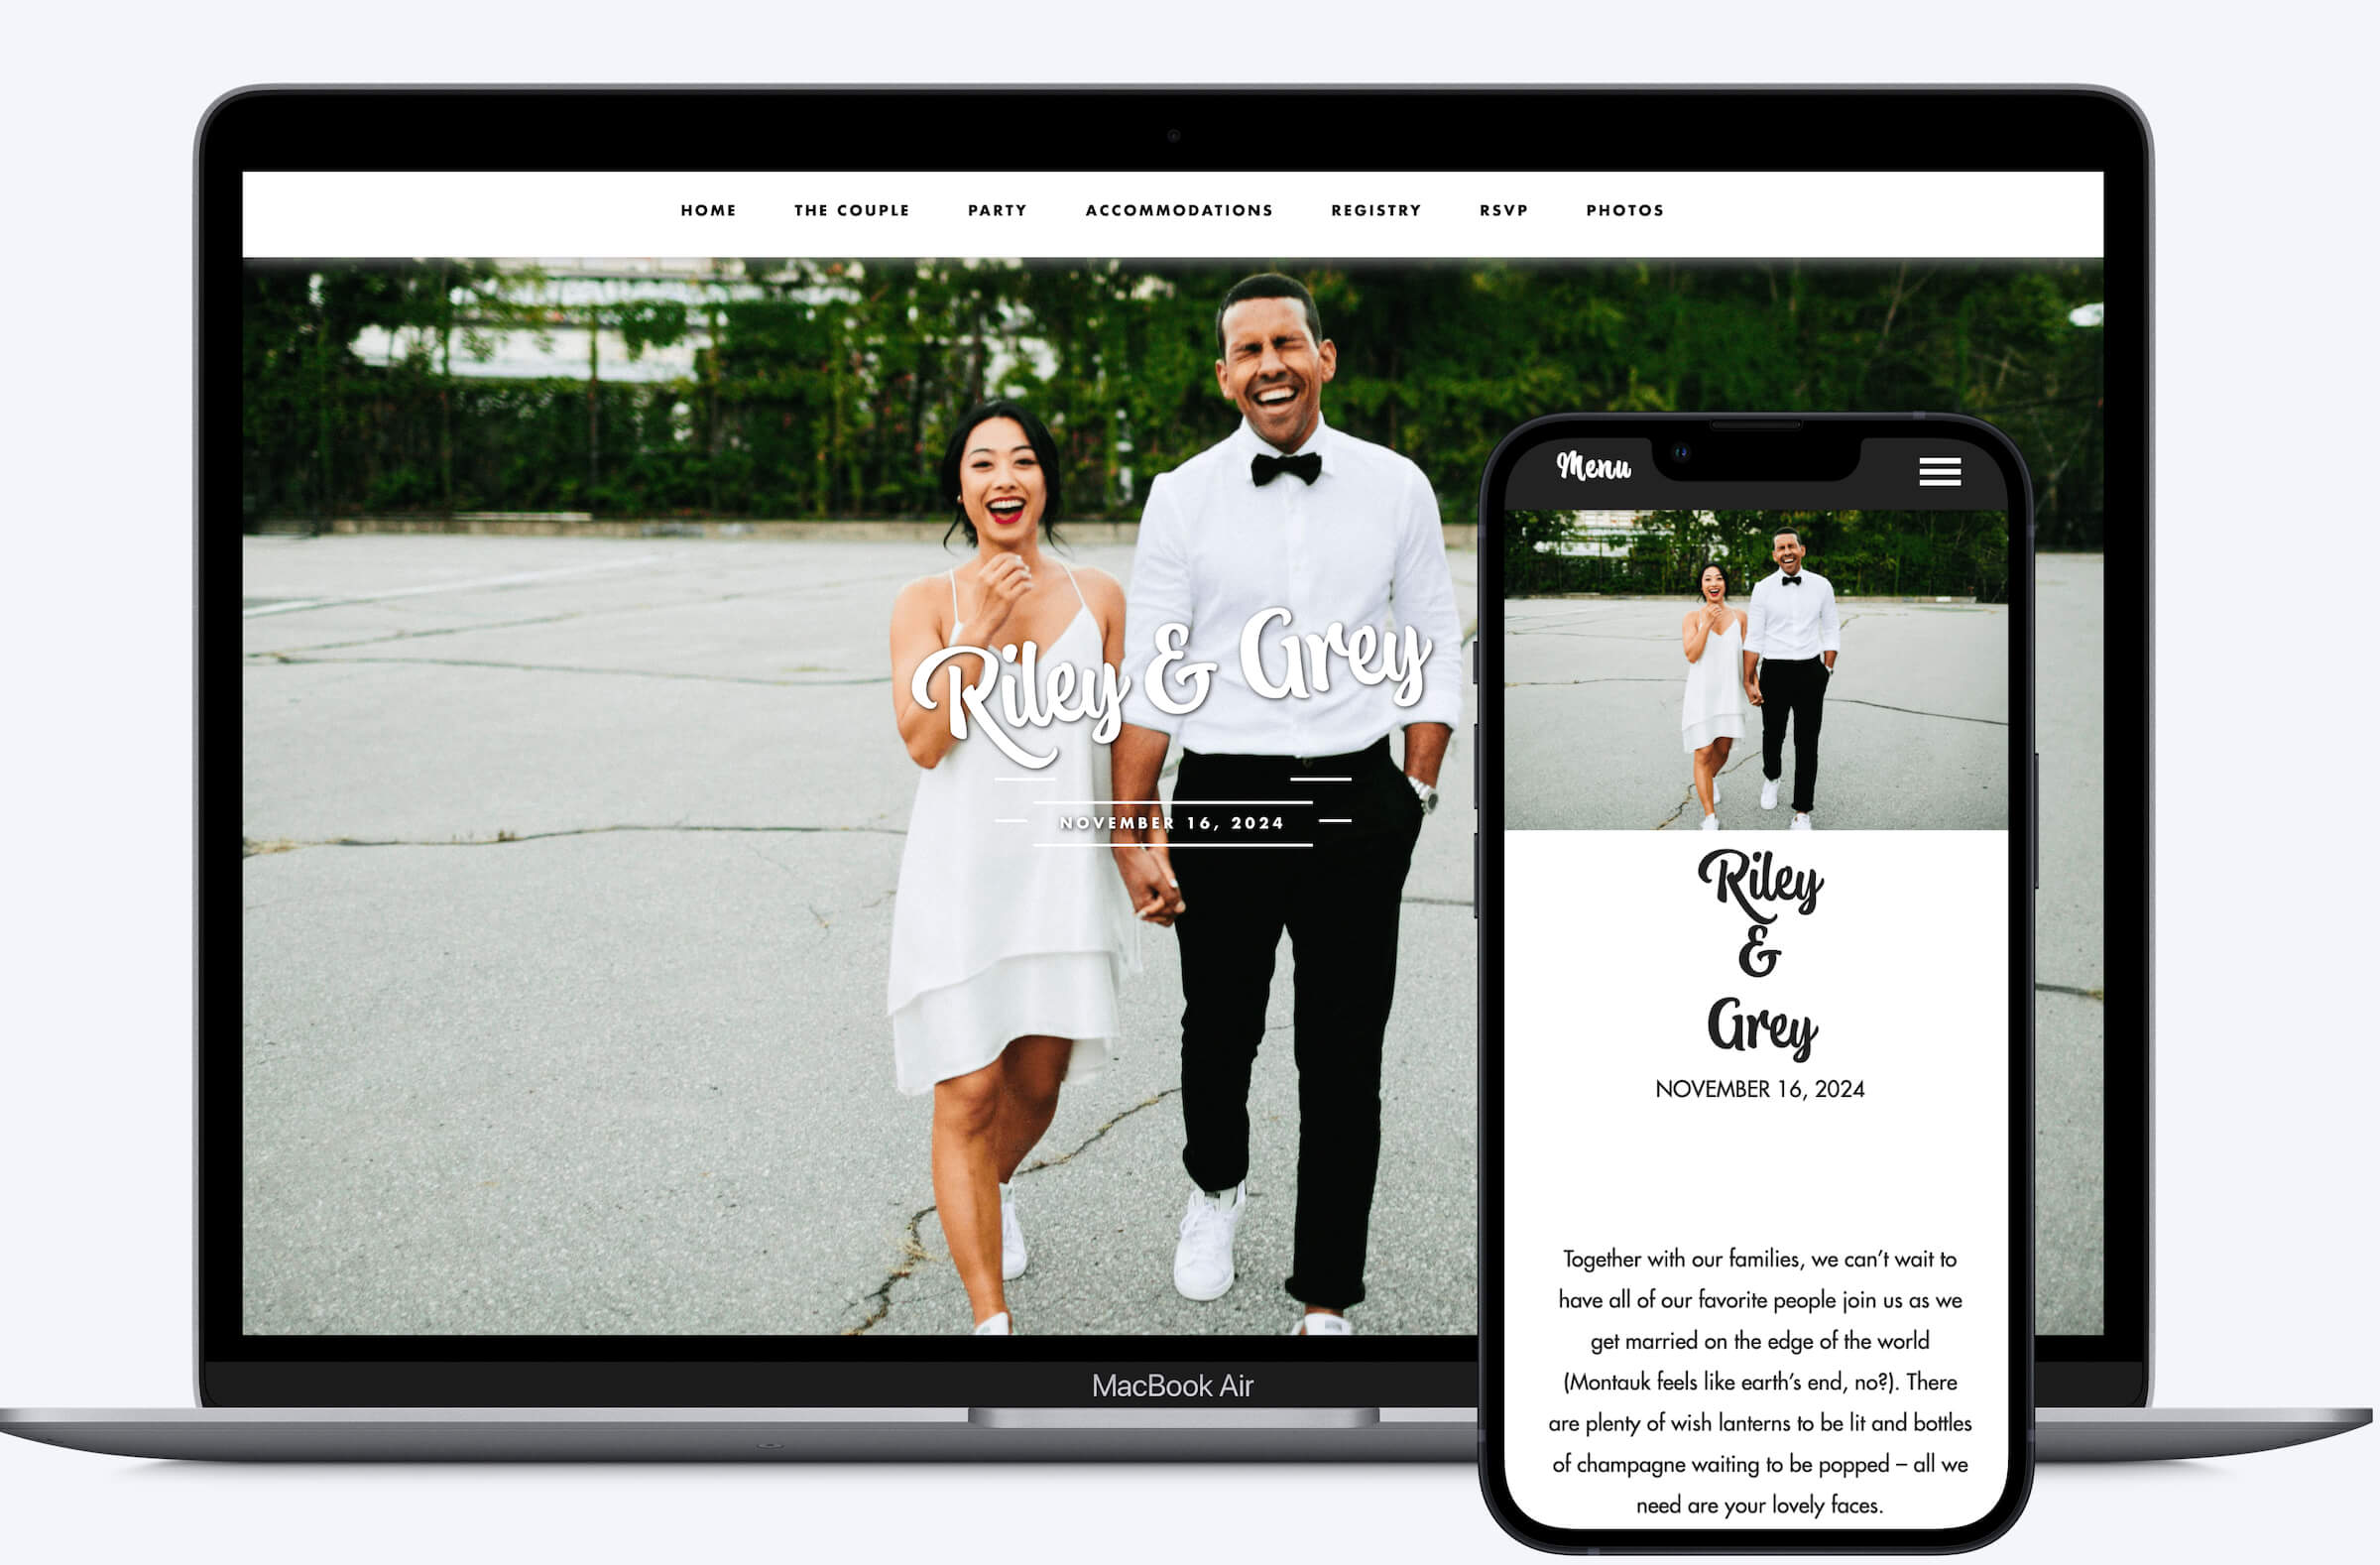 Example Riley & Grey wedding website displayed on a laptop and a mobile device